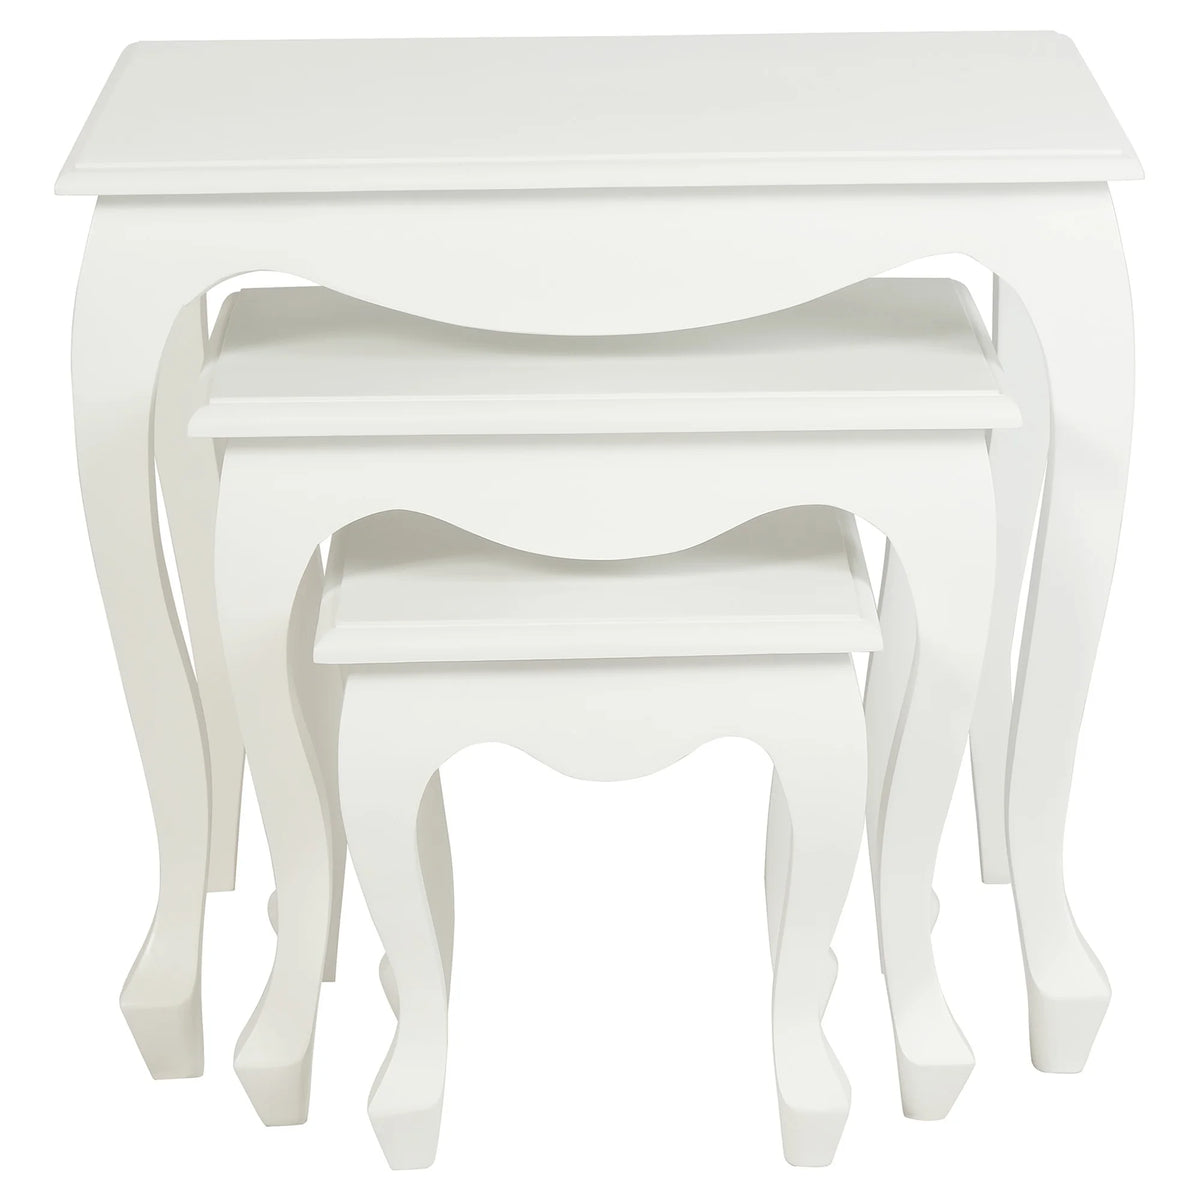 Set of 3 Queen Ann Timber Nested Tables - White - Notbrand